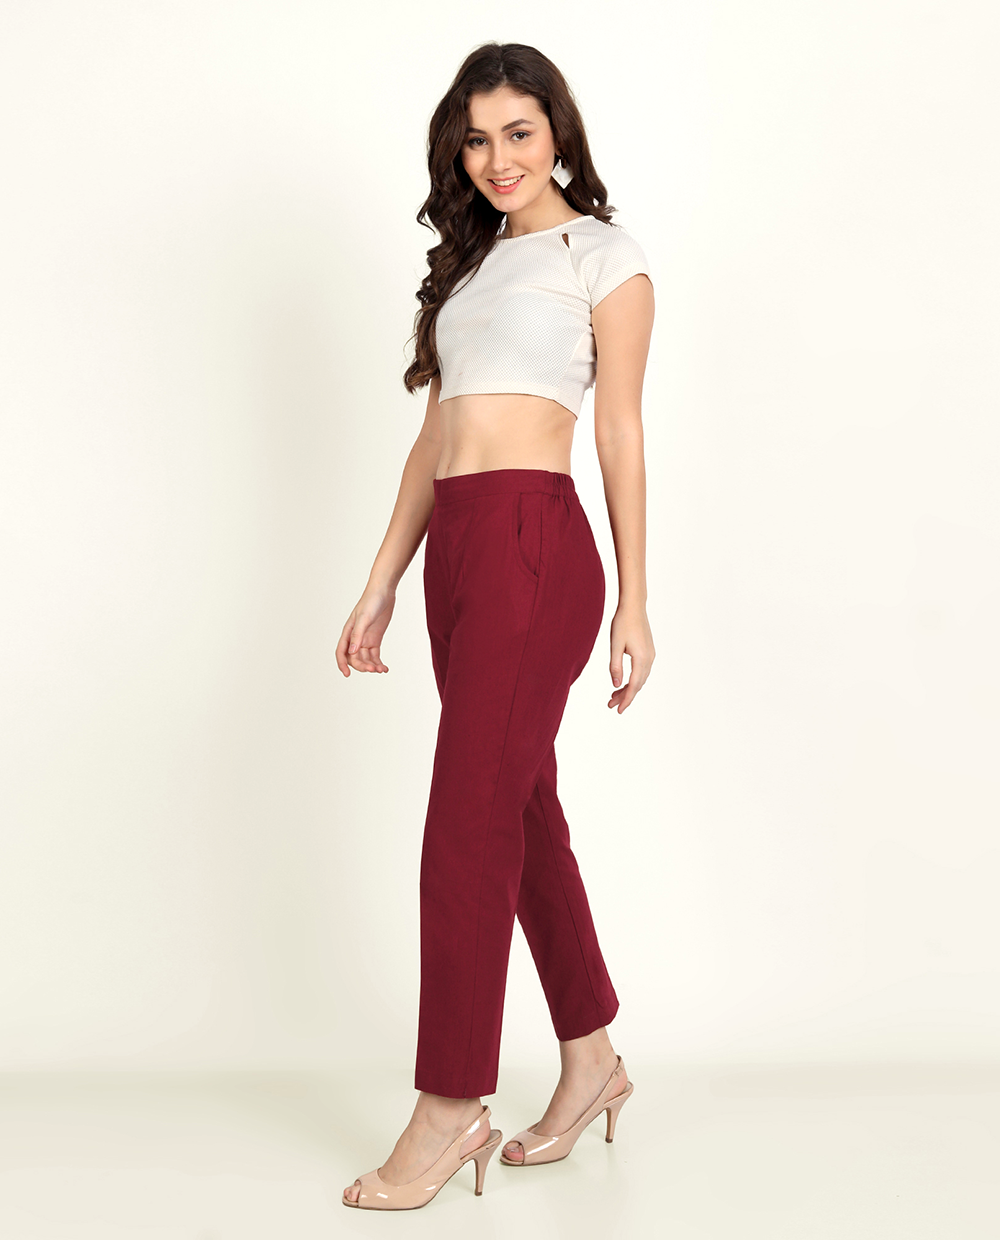 3 for $49! Maroon Red Cassi Side Pockets Workout Leggings Yoga Pants - Women